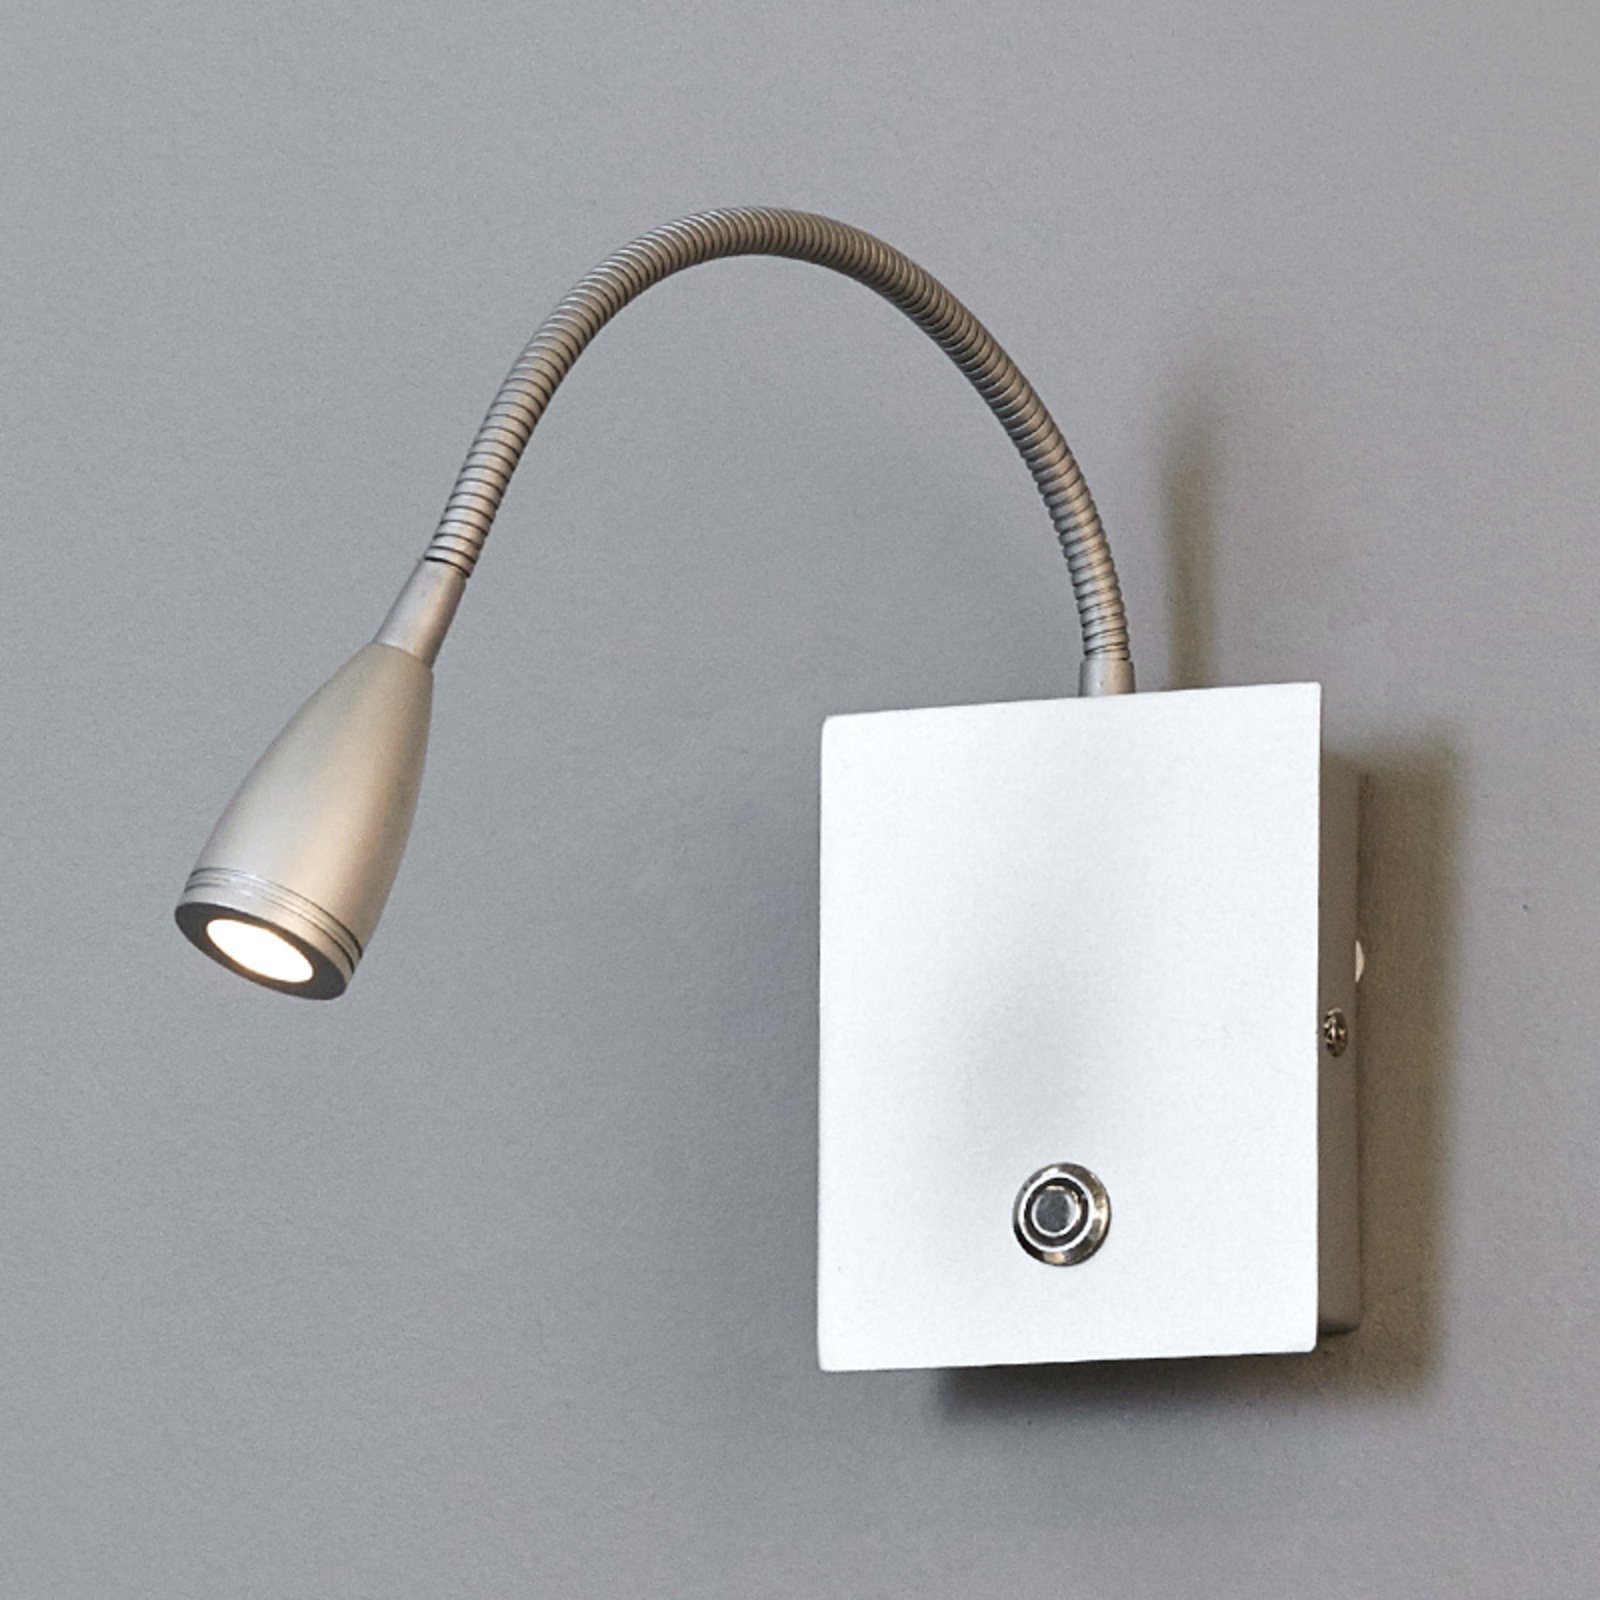 Dimmable LED wall light Torin in silver grey